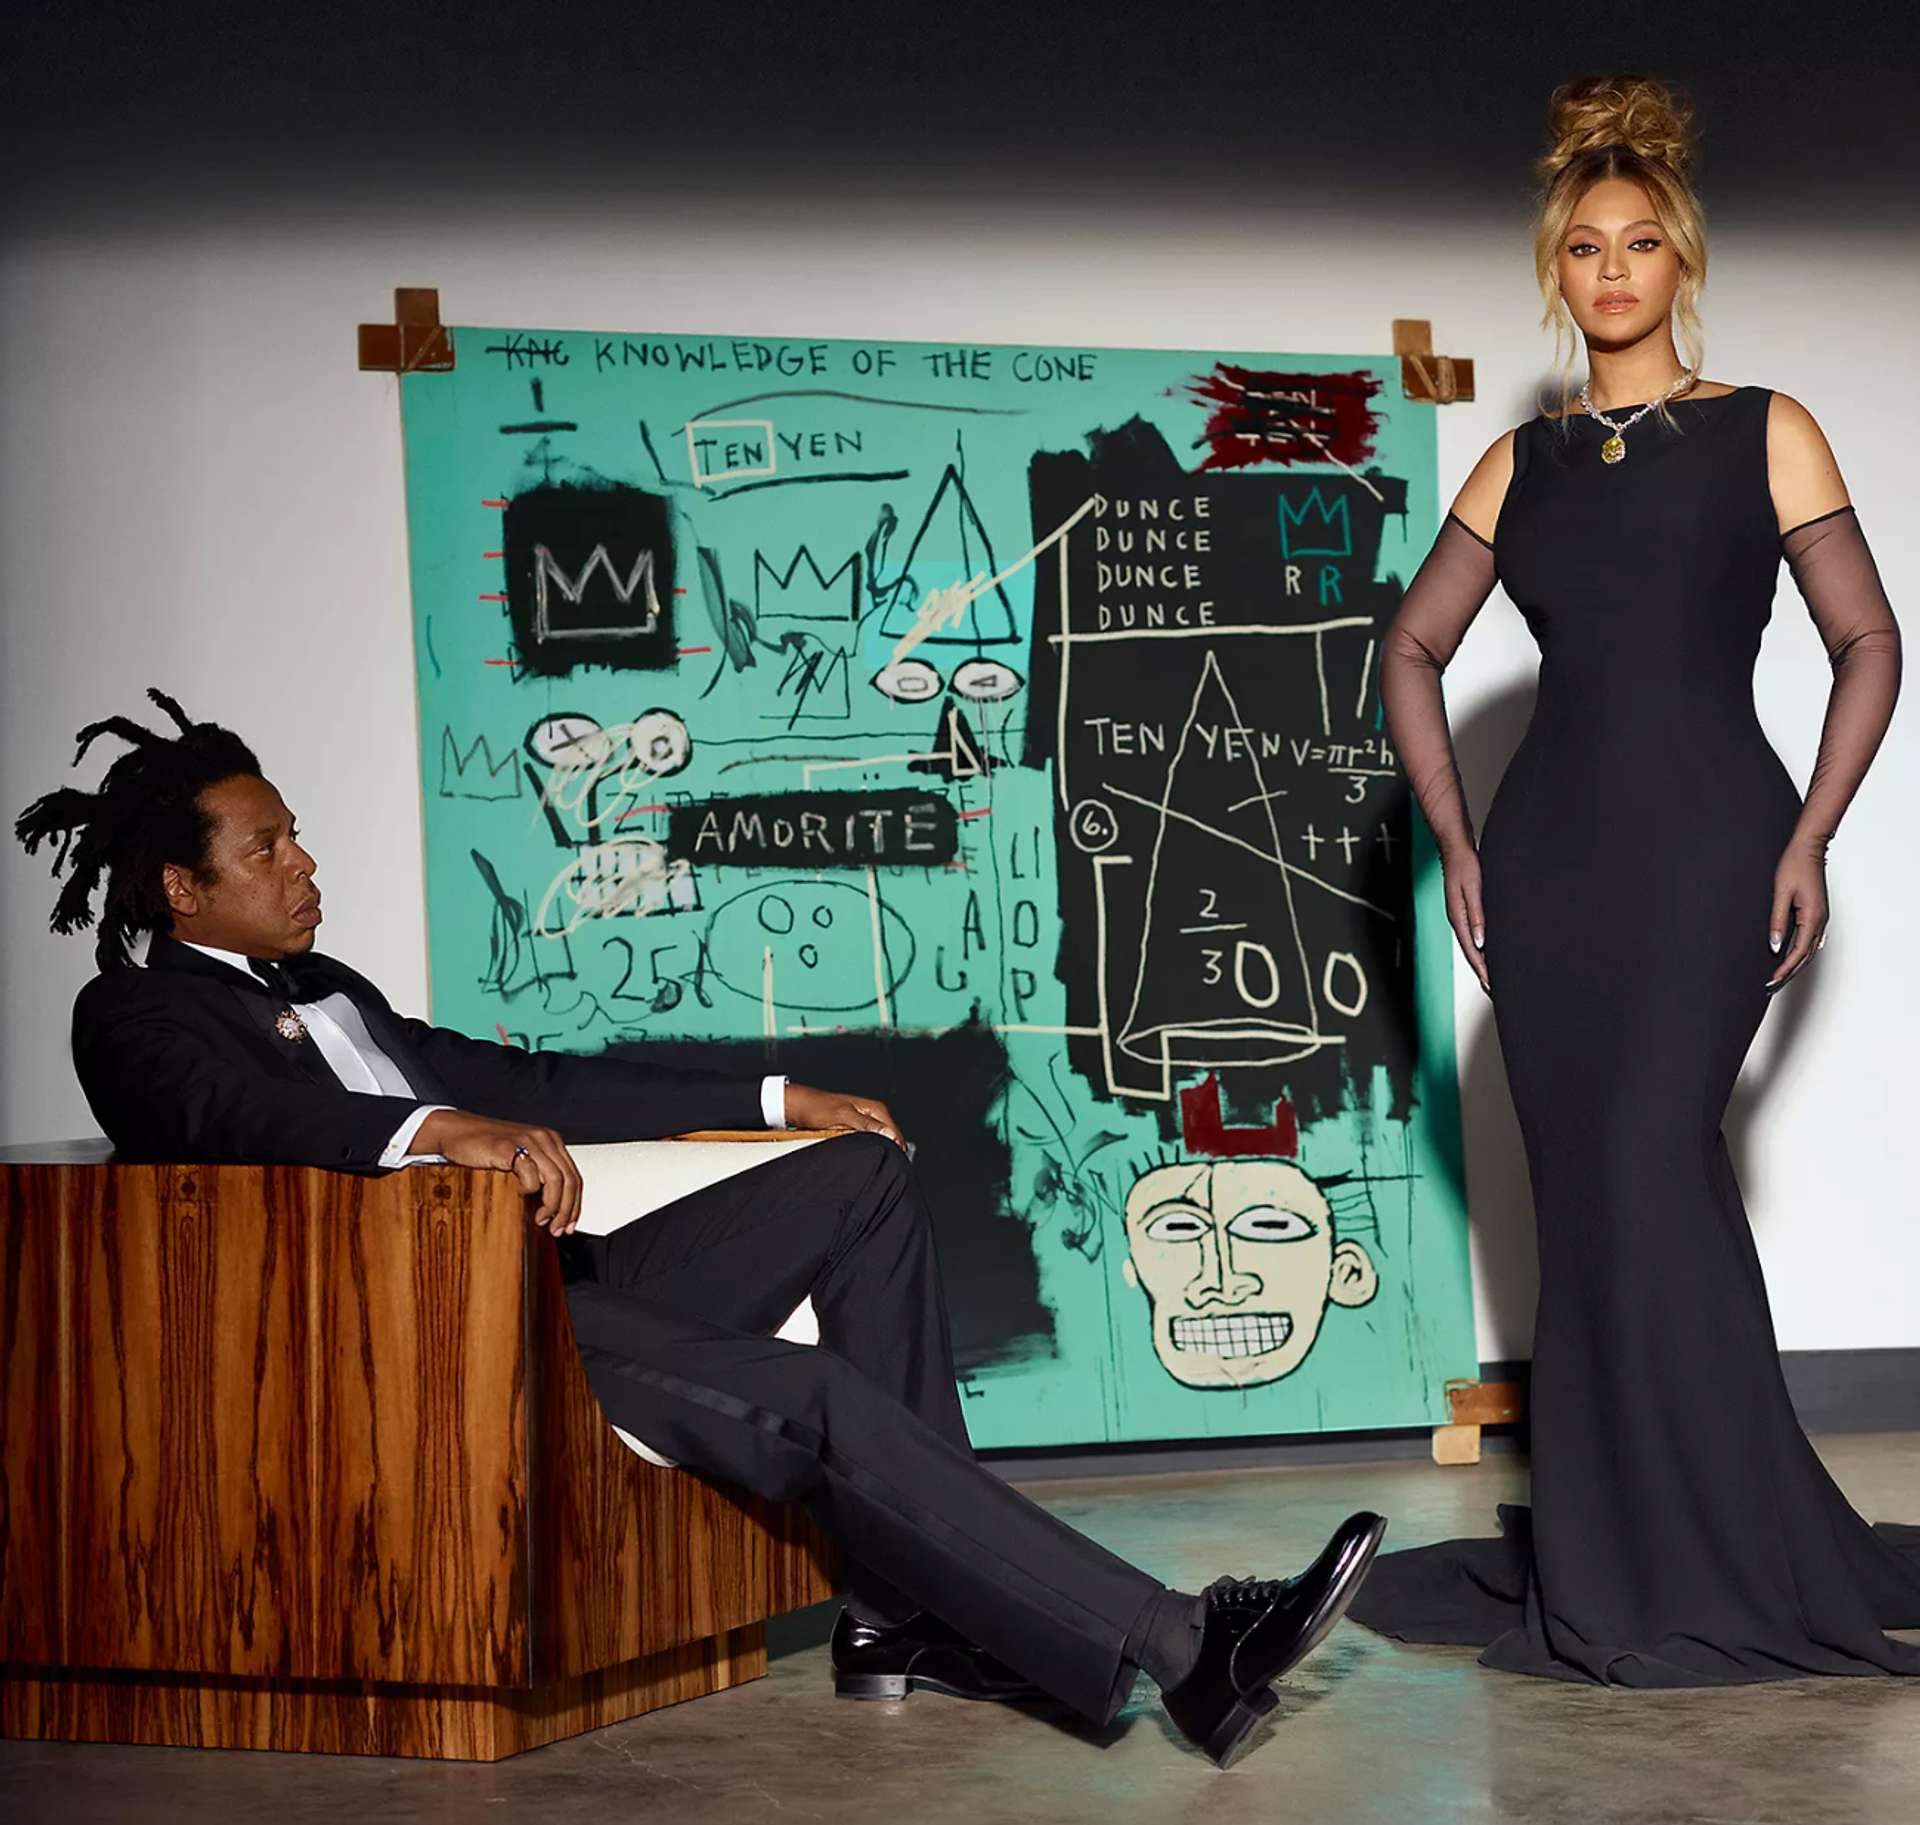 A photograph of the musicians Jay-Z and Beyoncé, dressed in formal attire, standing in front of the painting Equals Pi by Basquiat